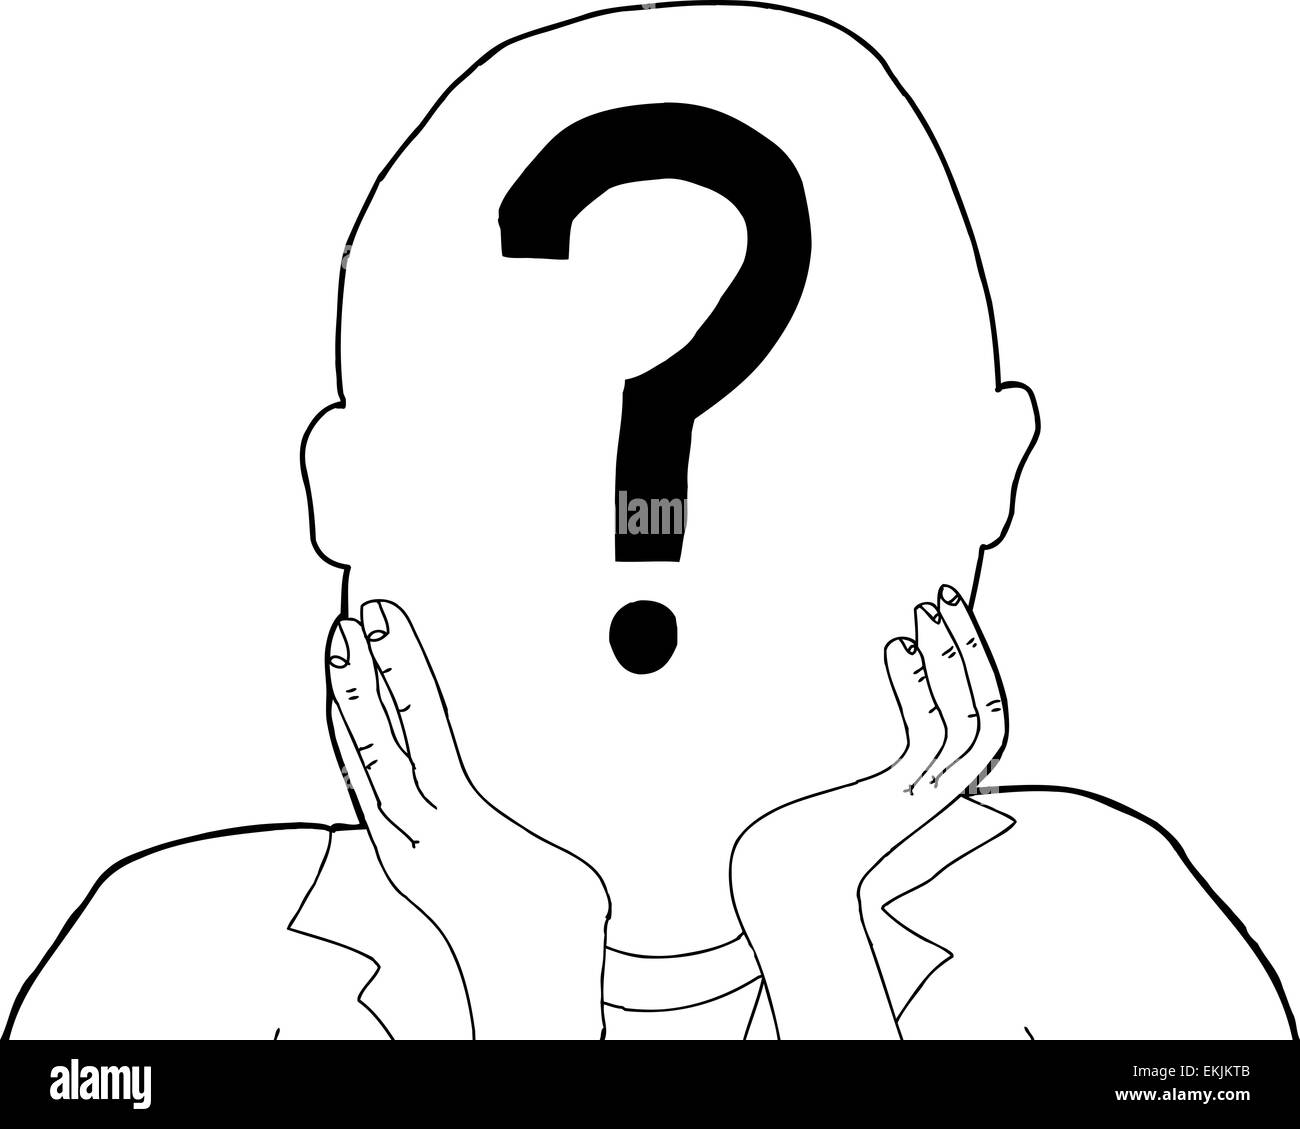 Outline of anonymous person with question mark Stock Photo